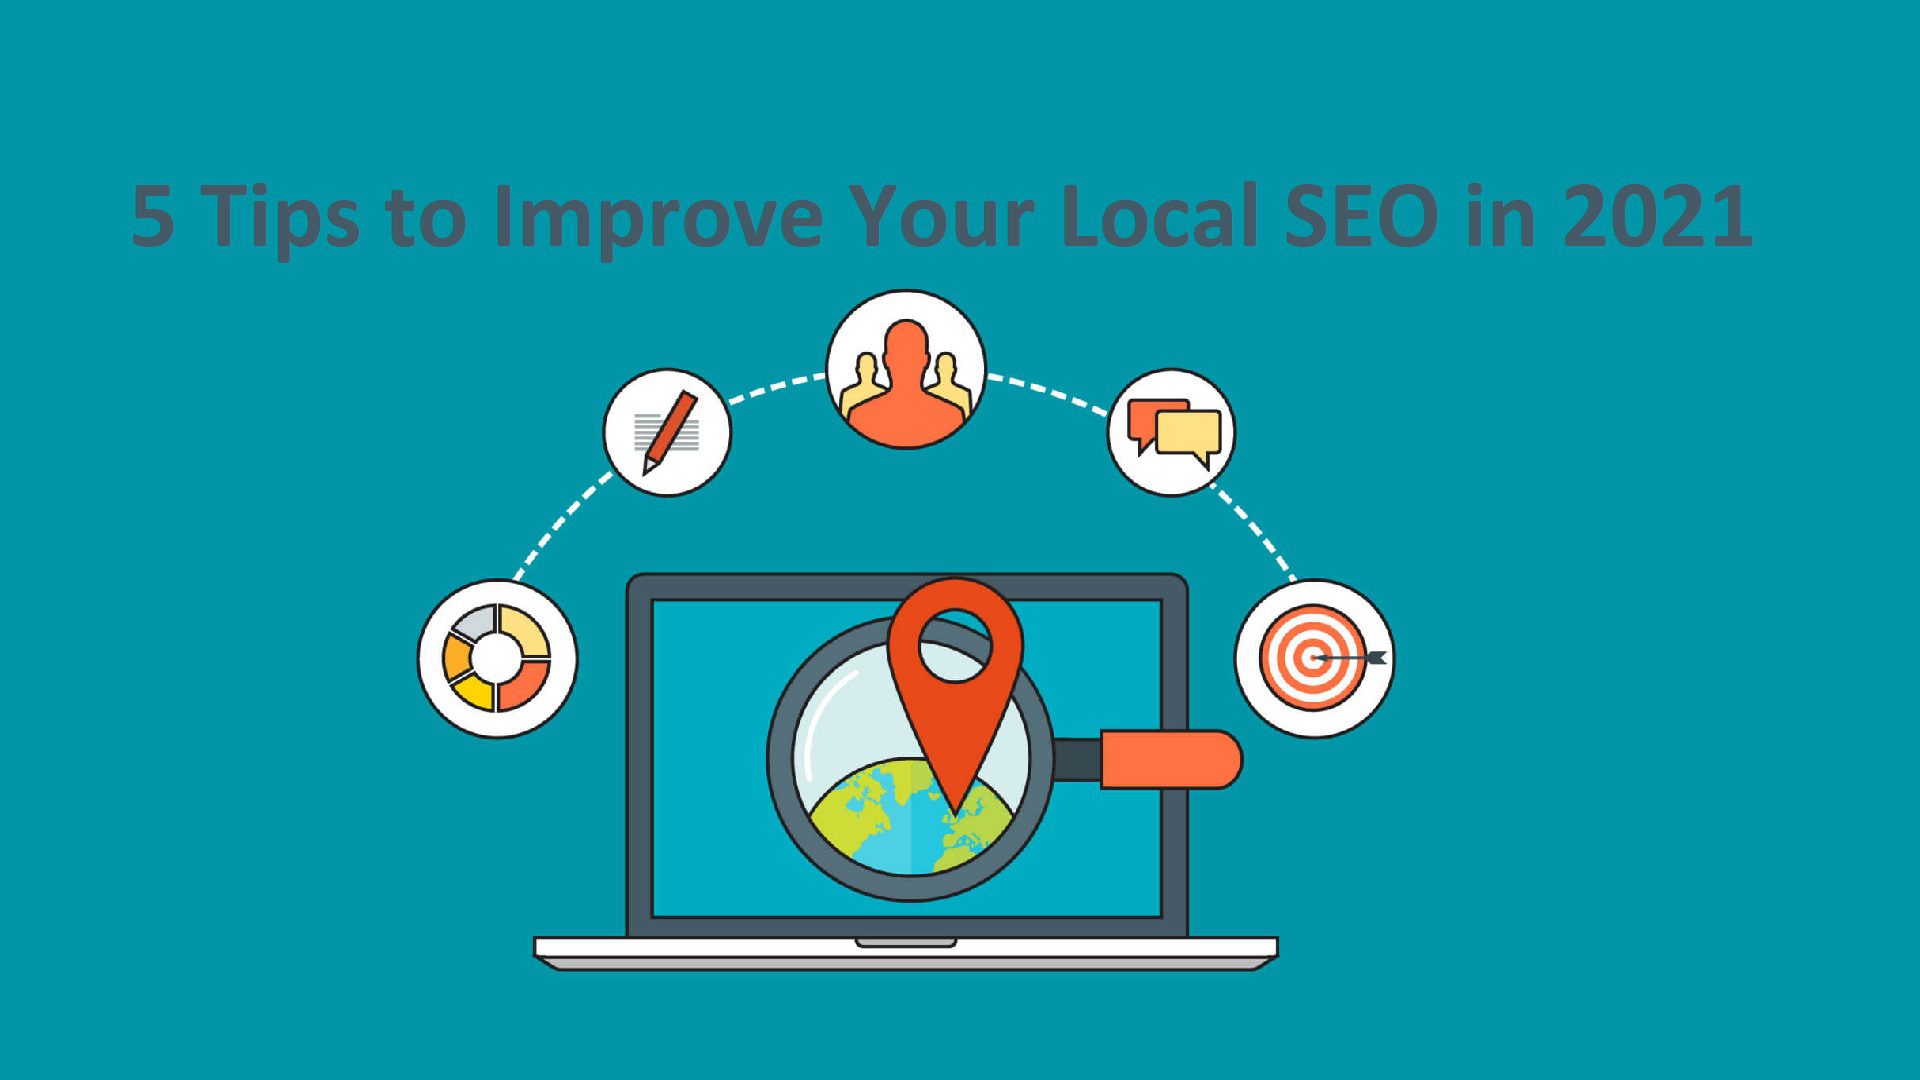 5 Tips to Improve Your Local SEO in 2021